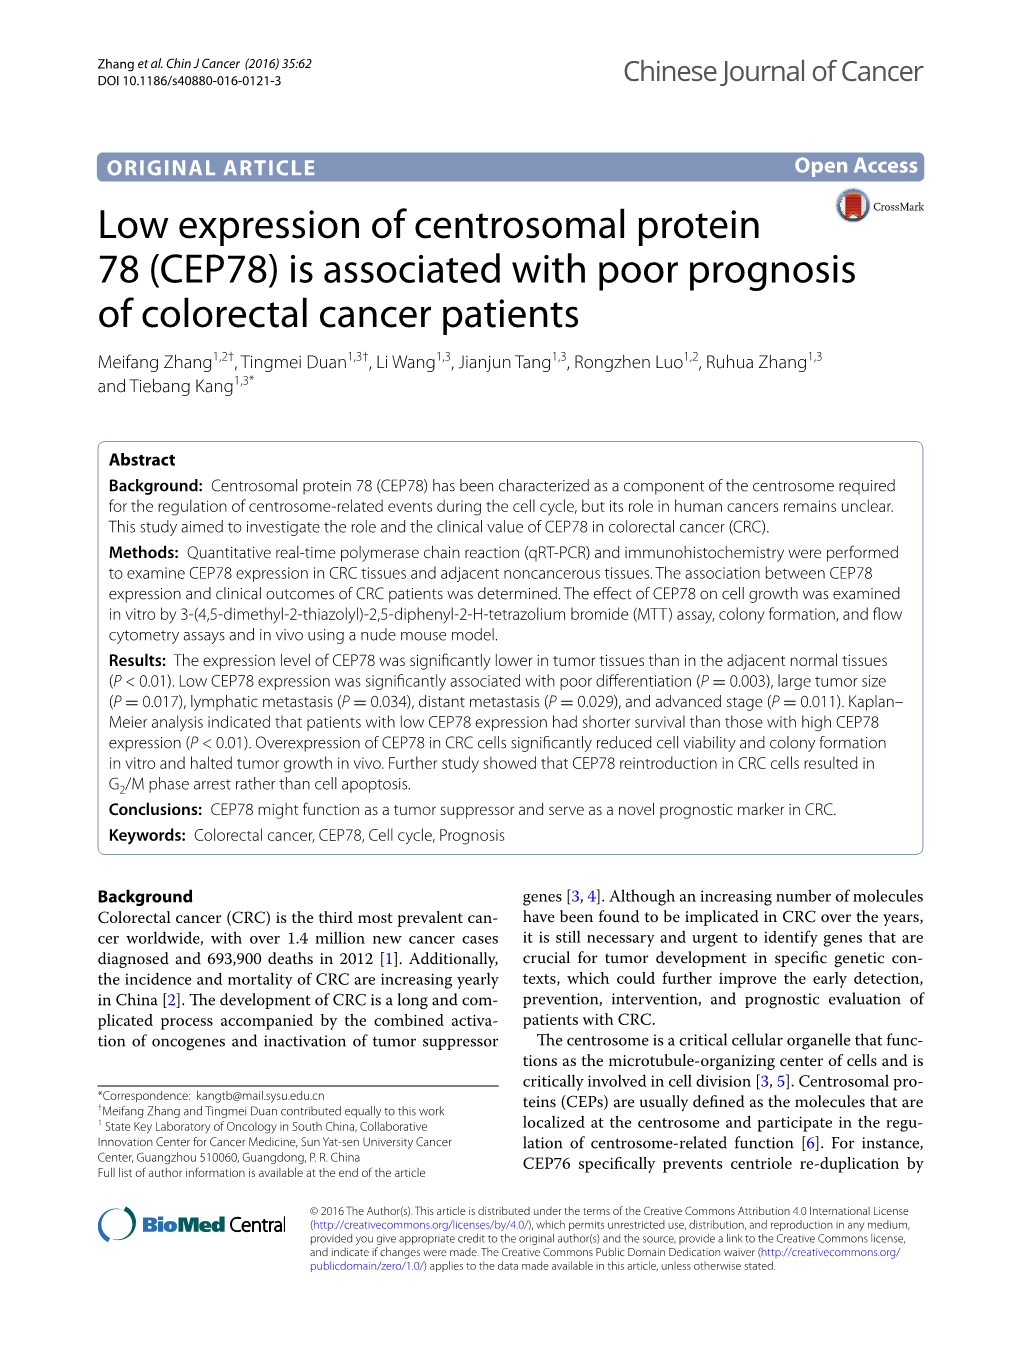 Low Expression of Centrosomal Protein 78 (CEP78) Is Associated with Poor Prognosis of Colorectal Cancer Patients